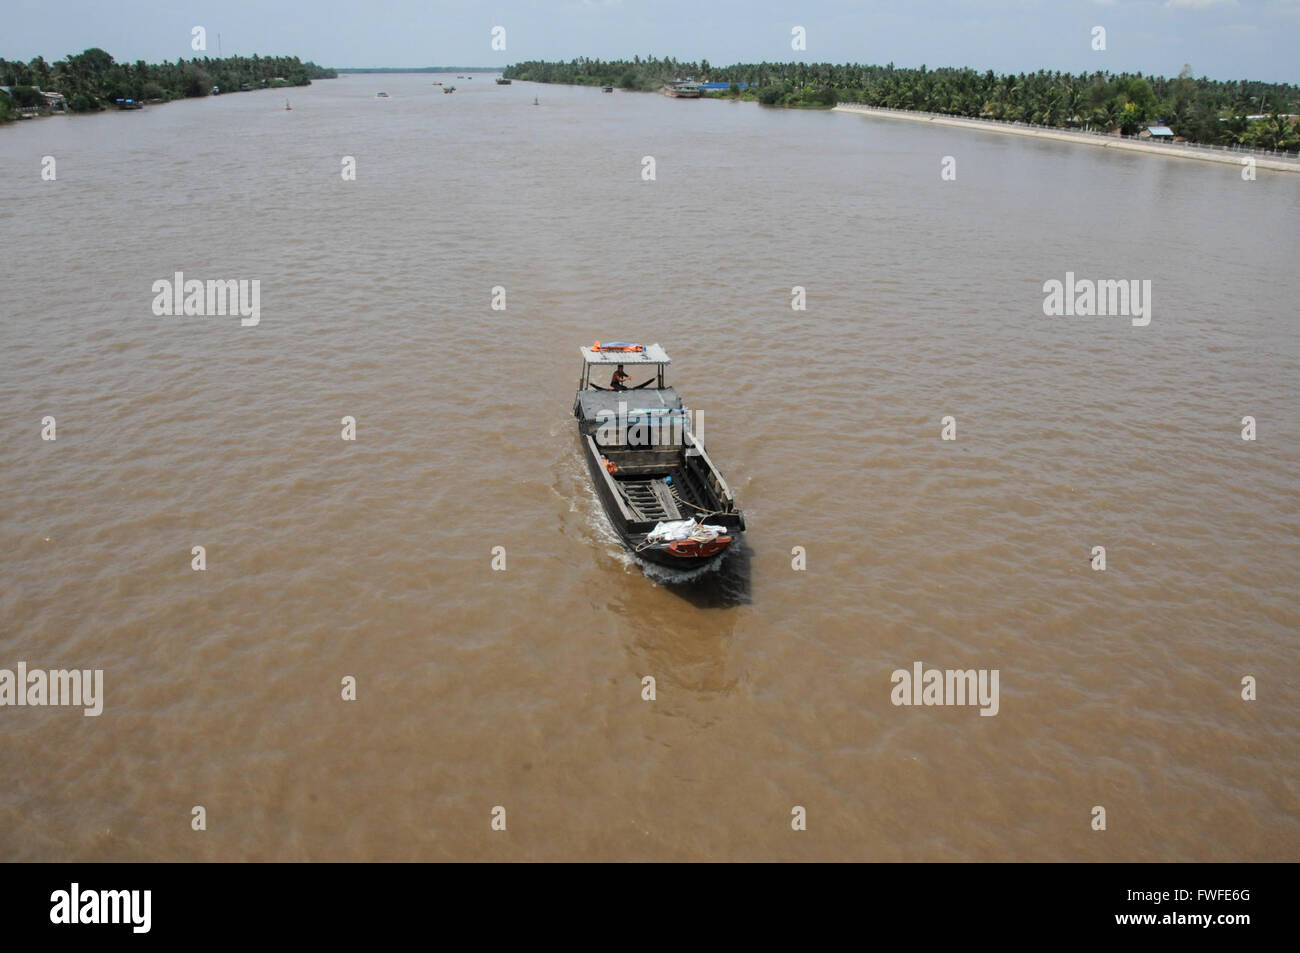 (160405) -- HO CHI MINH CITY, April 5, 2016 (Xinhua) -- Photo taken on April 4, 2016, shows the site of fast-flowing river surging downstream to the Mekong Delta in Ben Tre province, Vietnam. Since late 2015, countries along the Lancang-Mekong River, including Vietnam, have suffered from drought to varying extents due to the impact of the El Nino phenomenon. China released an emergency water supply from its Jinghong Hydropower Station in the southwest Yunnan province to feed the downstream Mekong River between March 15 and April 10, helped to greatly alleviate the devastating situation. So far Stock Photo